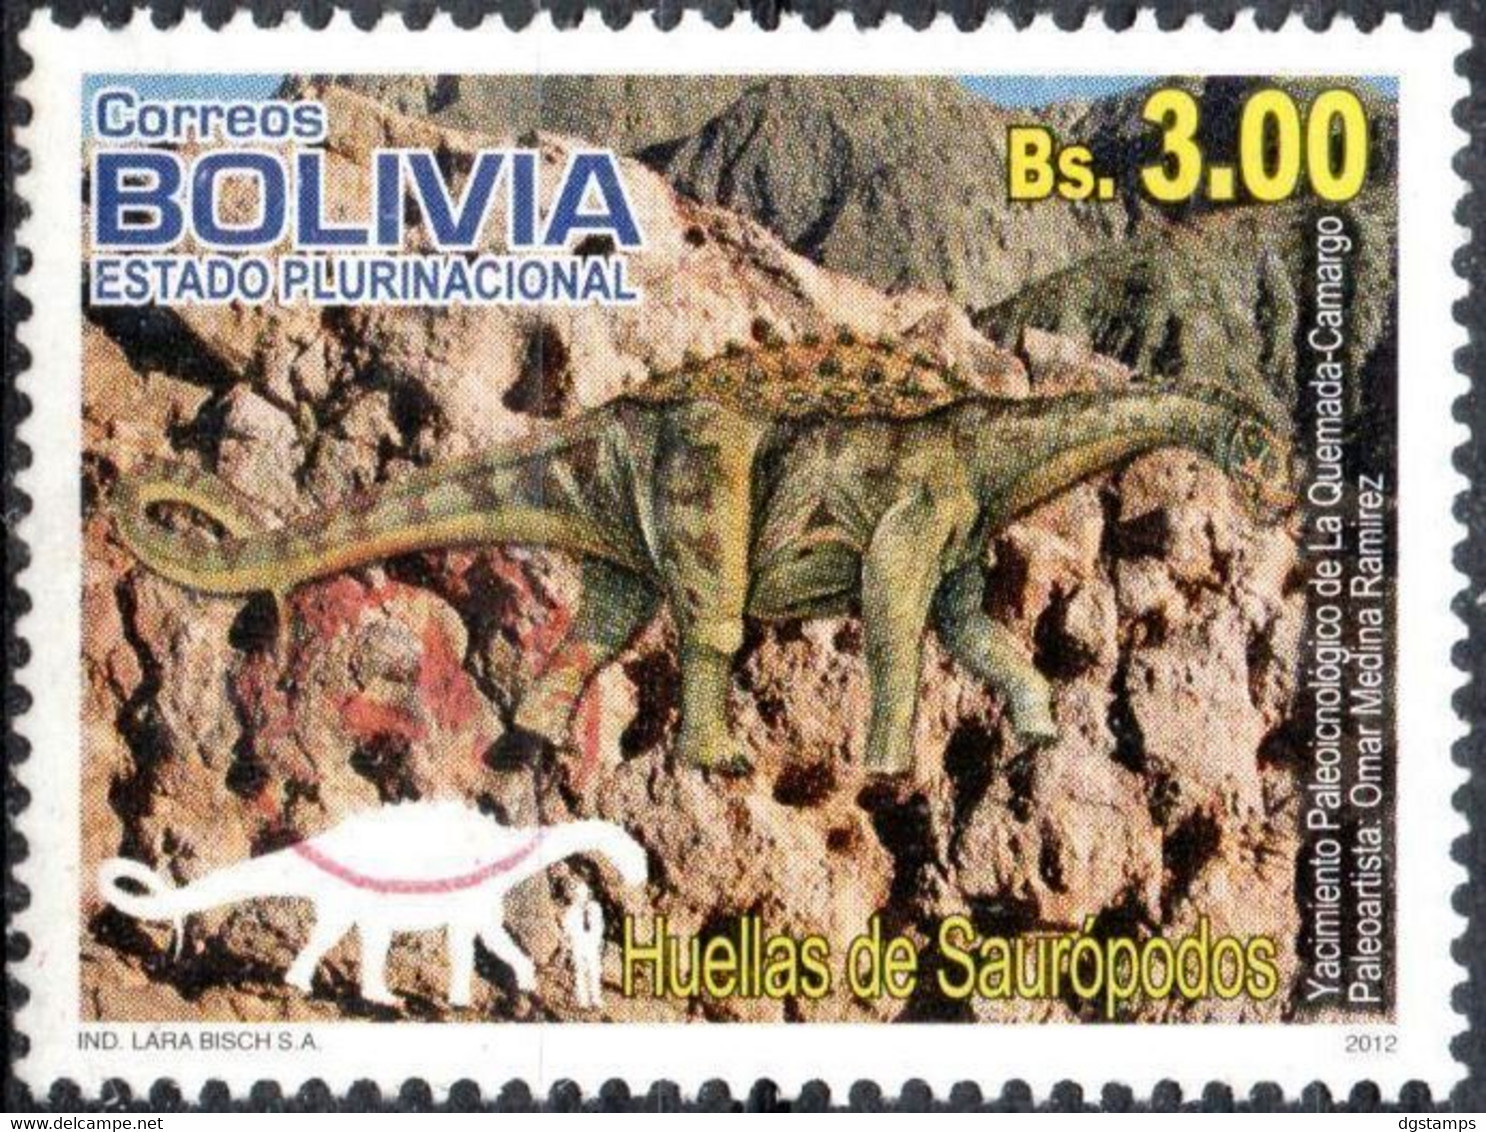 Bolivia 2018 ** CEFIBOL 2391 Issued 2012 ECOBOL CB #2145 Sauropod Footprints, AgBC Enabled. Only 100 Known. - Bolivia